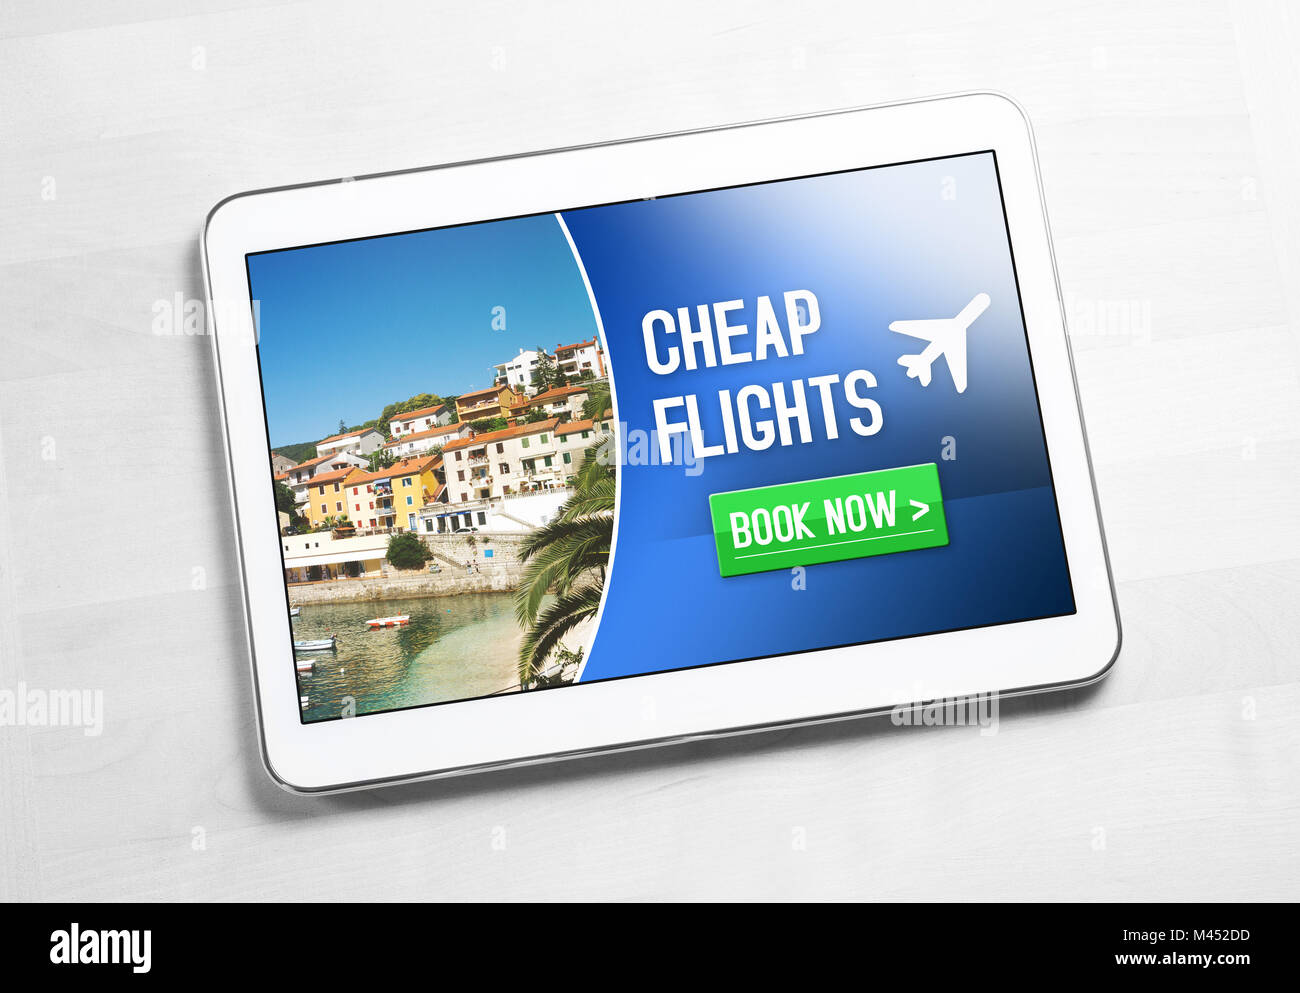 Cheap flights for sale on internet. Top view to tablet on wooden table with affordable and inexpensive vacation offer on screen. Stock Photo